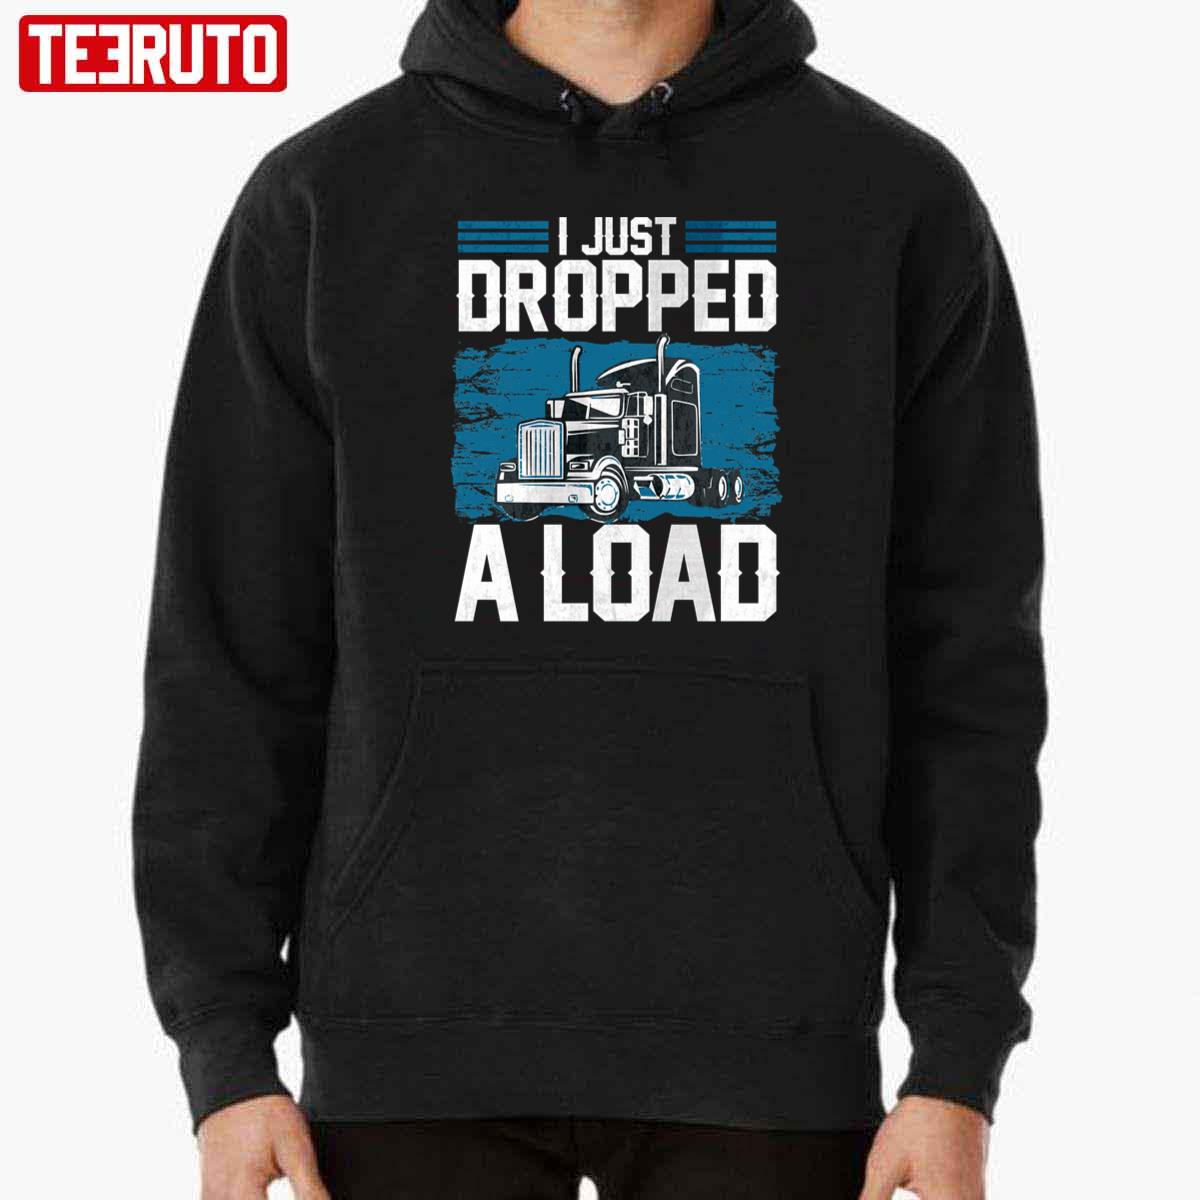 https://teeruto.com/wp-content/uploads/2022/04/i-just-dropped-a-load-funny-trucker-humor-quotes-unisex-tshirt3mkjt.jpg